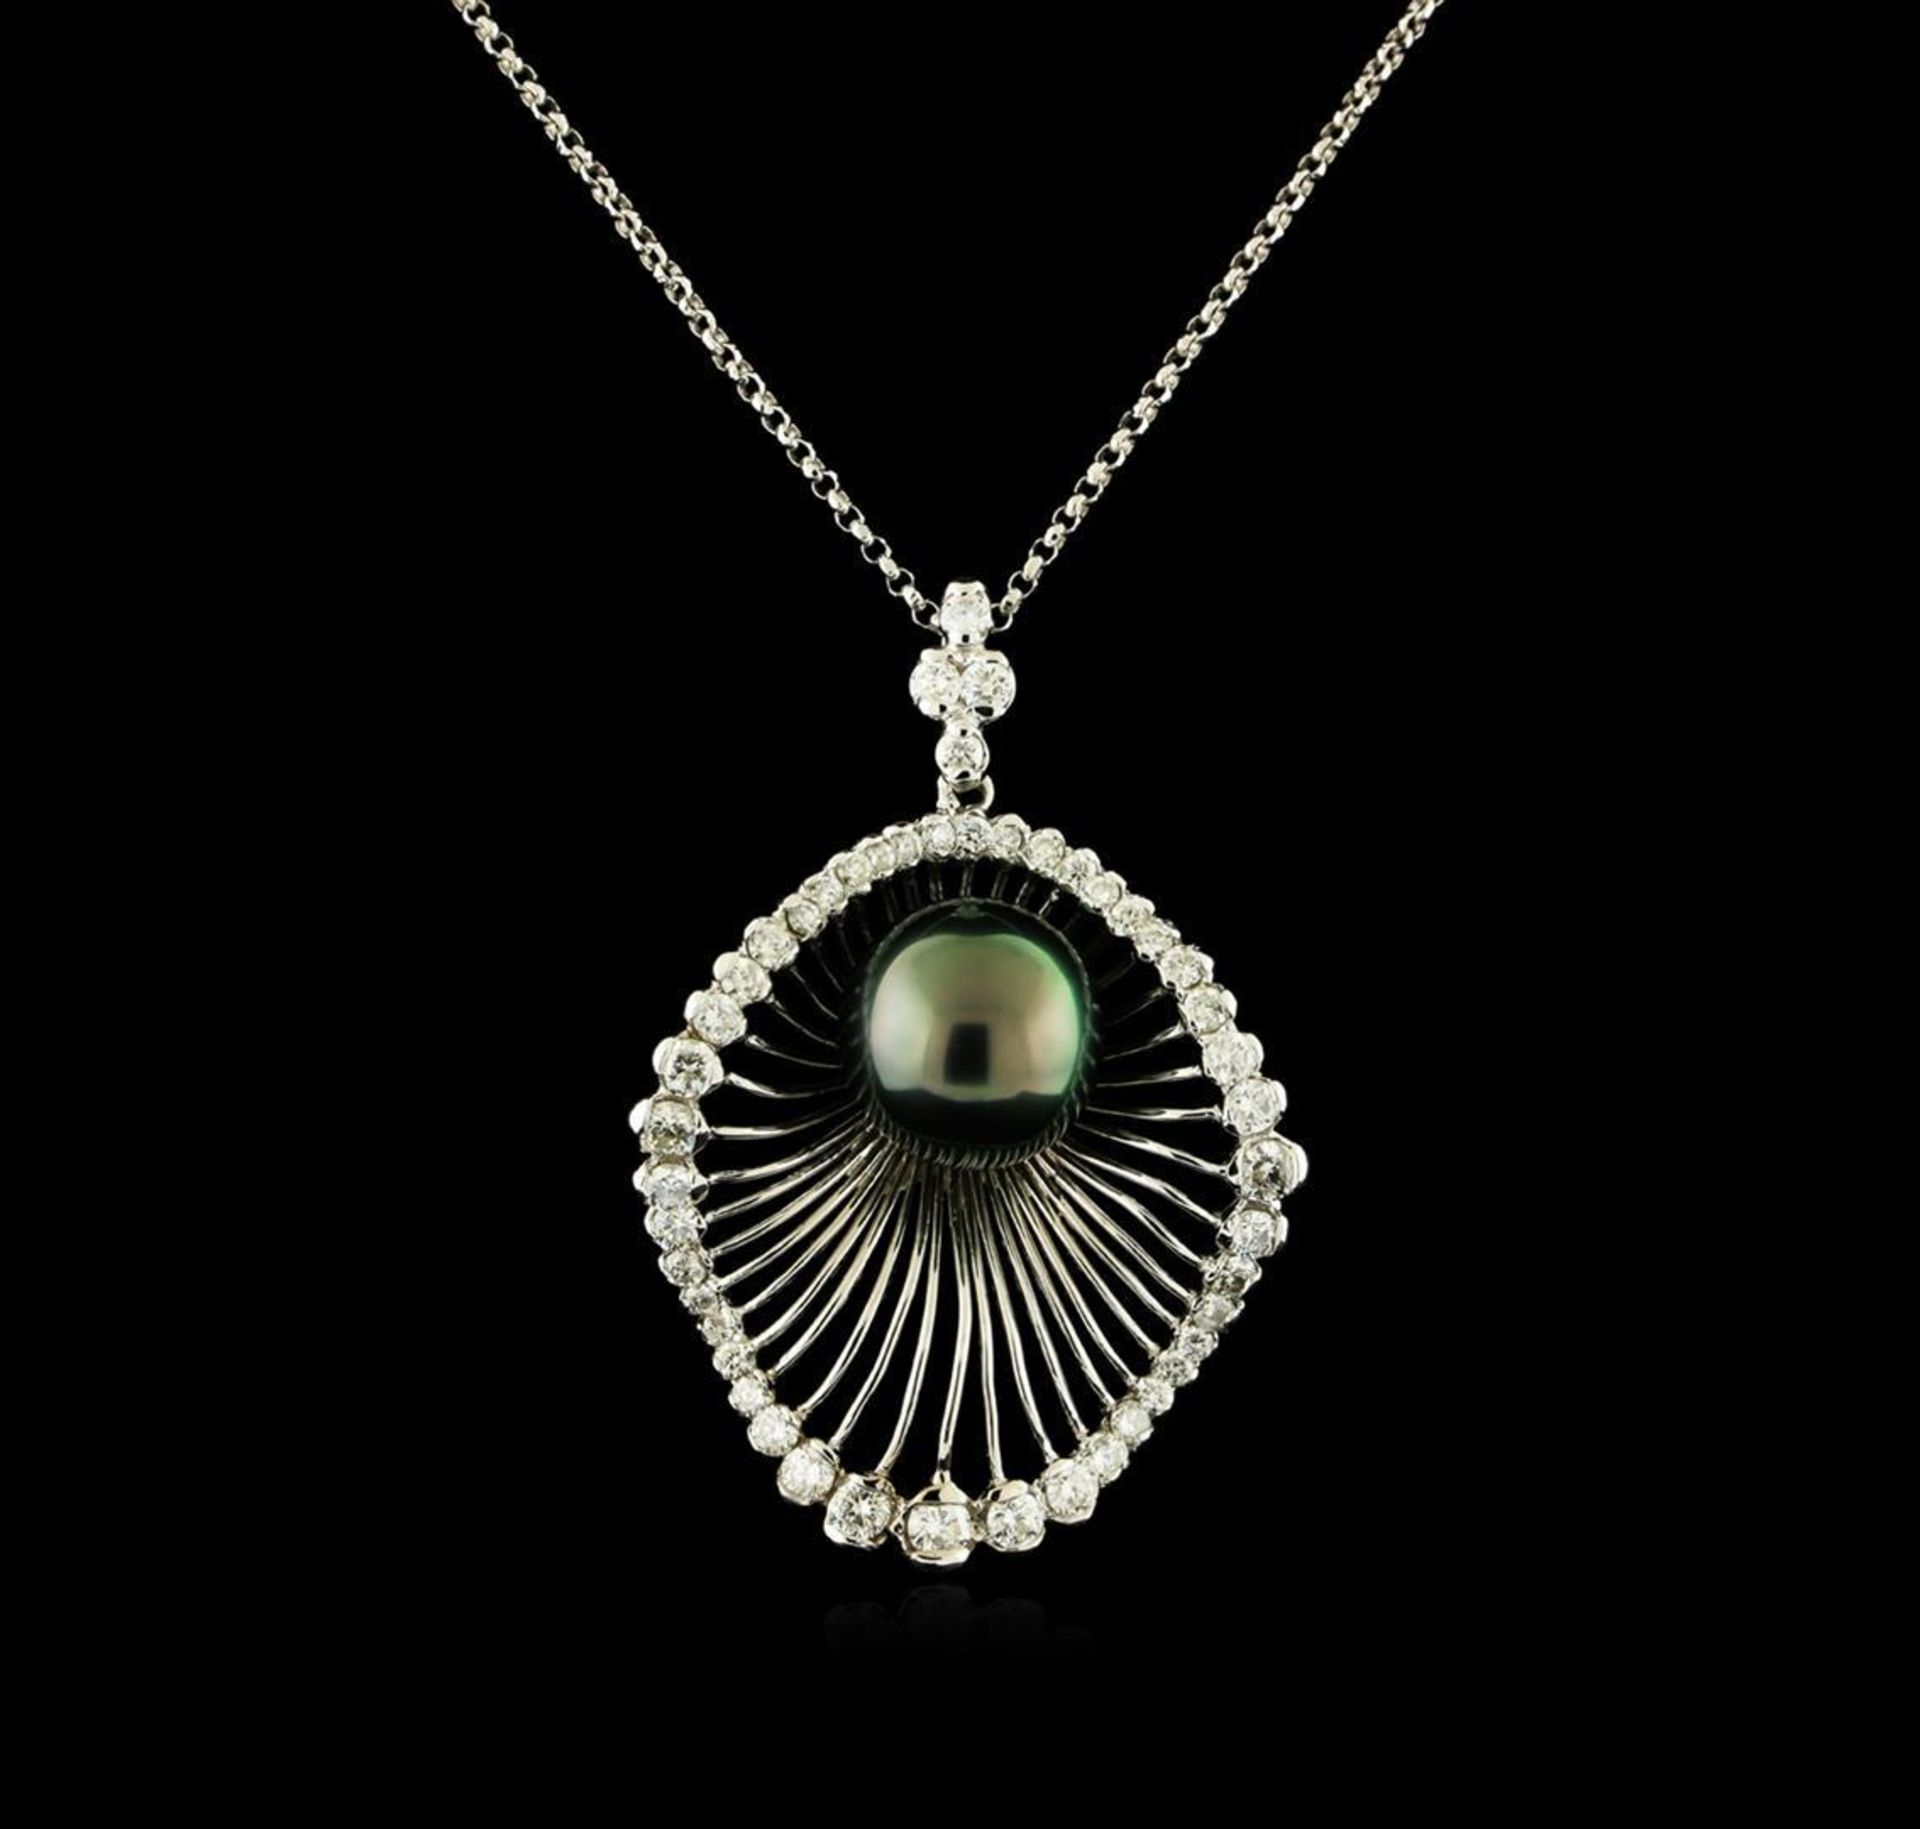 1.34 ctw Diamond and Pearl Pendant With Chain - 14KT White Gold - Image 2 of 3